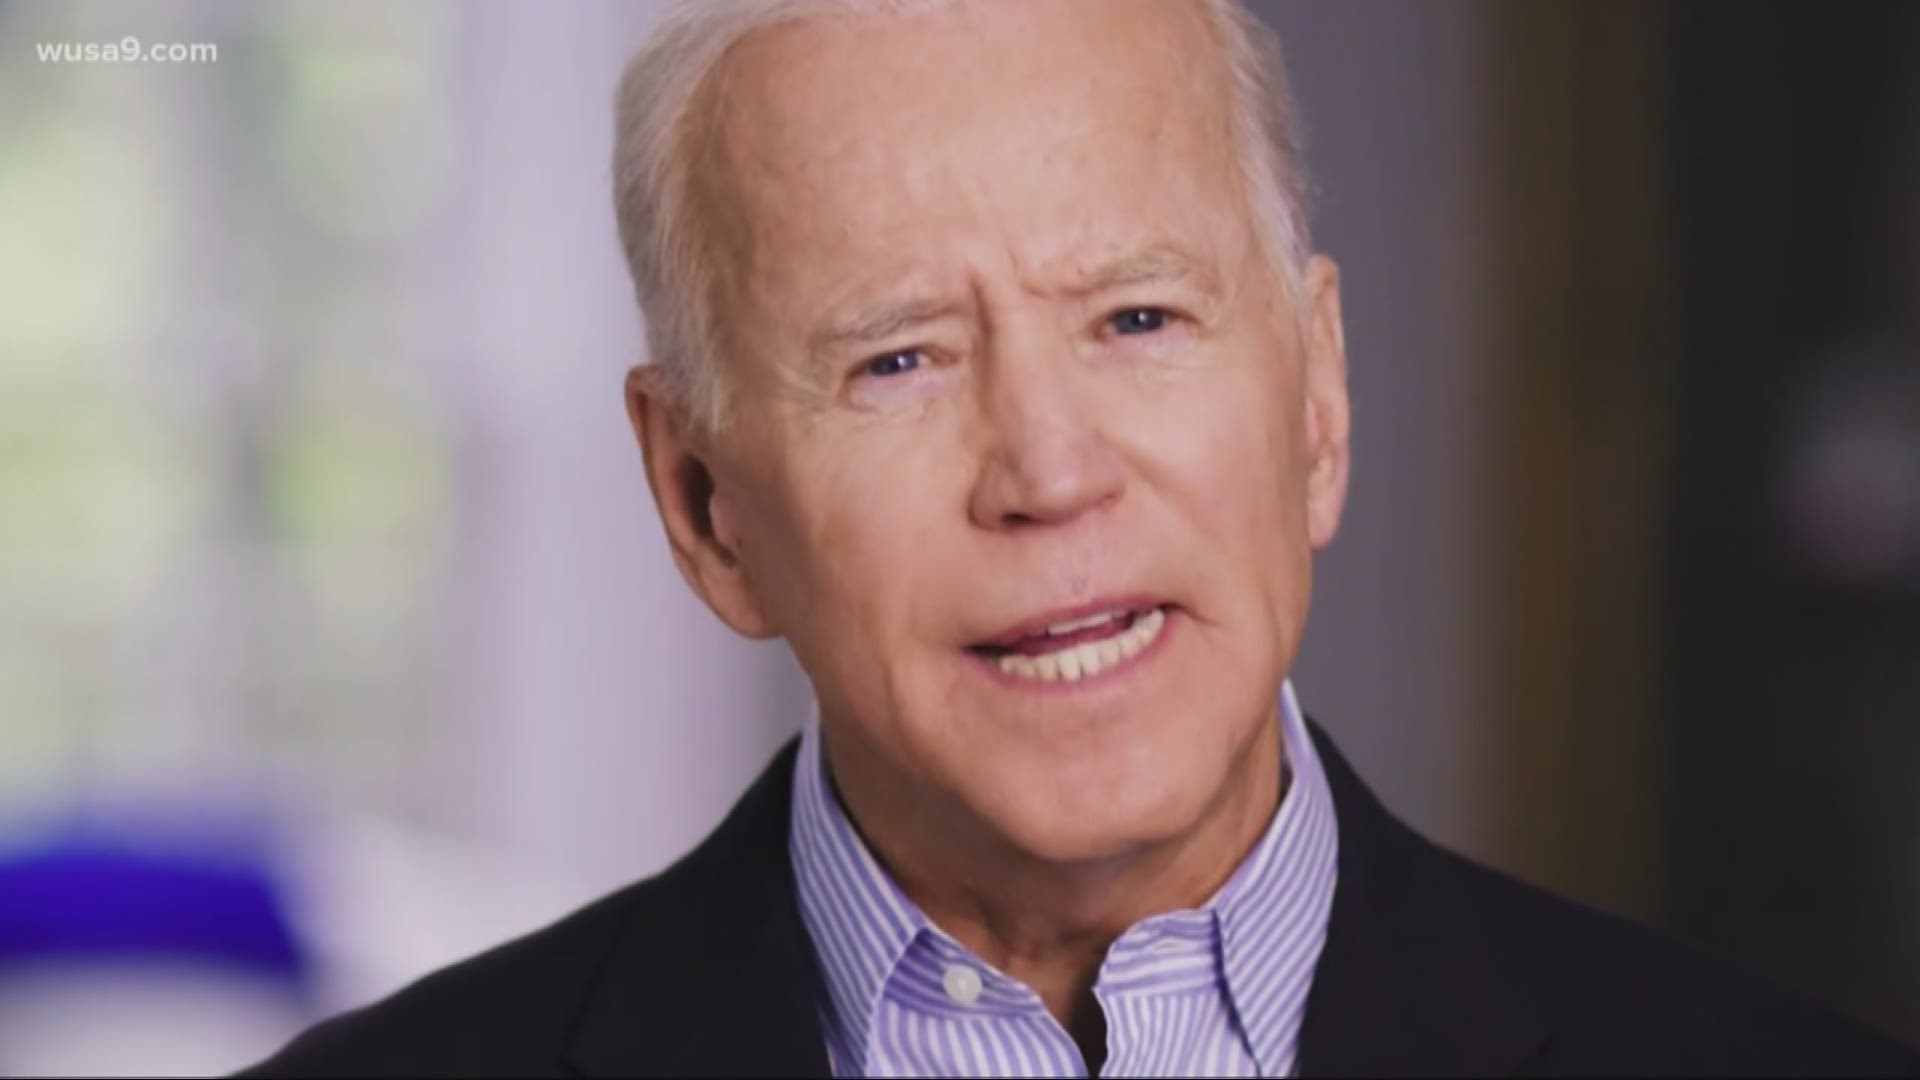 Former Vice President Joe Biden formally joined the crowded Democratic presidential contest on Thursday, betting that his working-class appeal and ties to Barack Obama's presidency will help him overcome questions about his place in today's increasingly liberal Democratic Party.